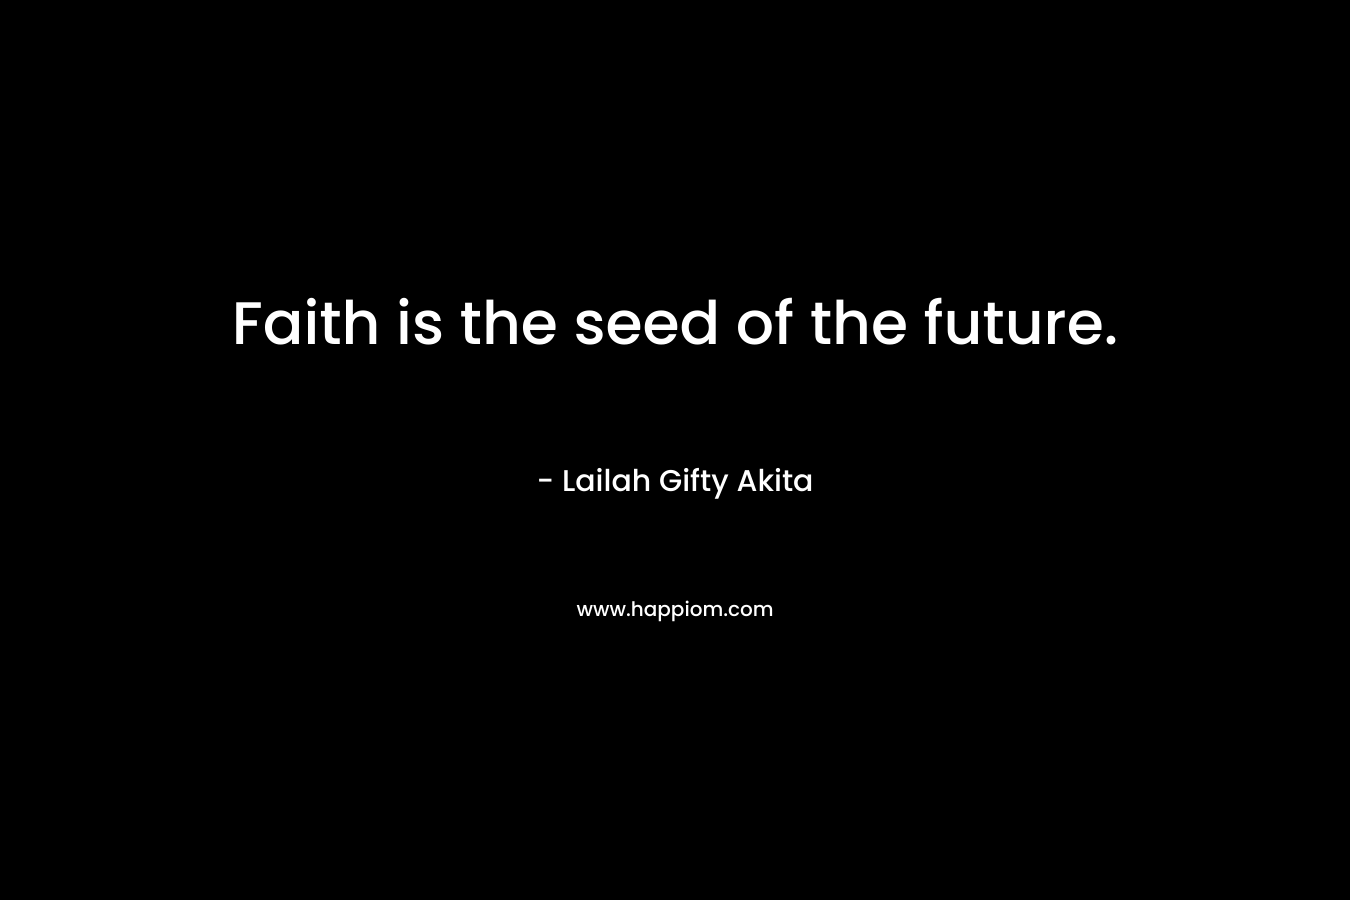 Faith is the seed of the future.